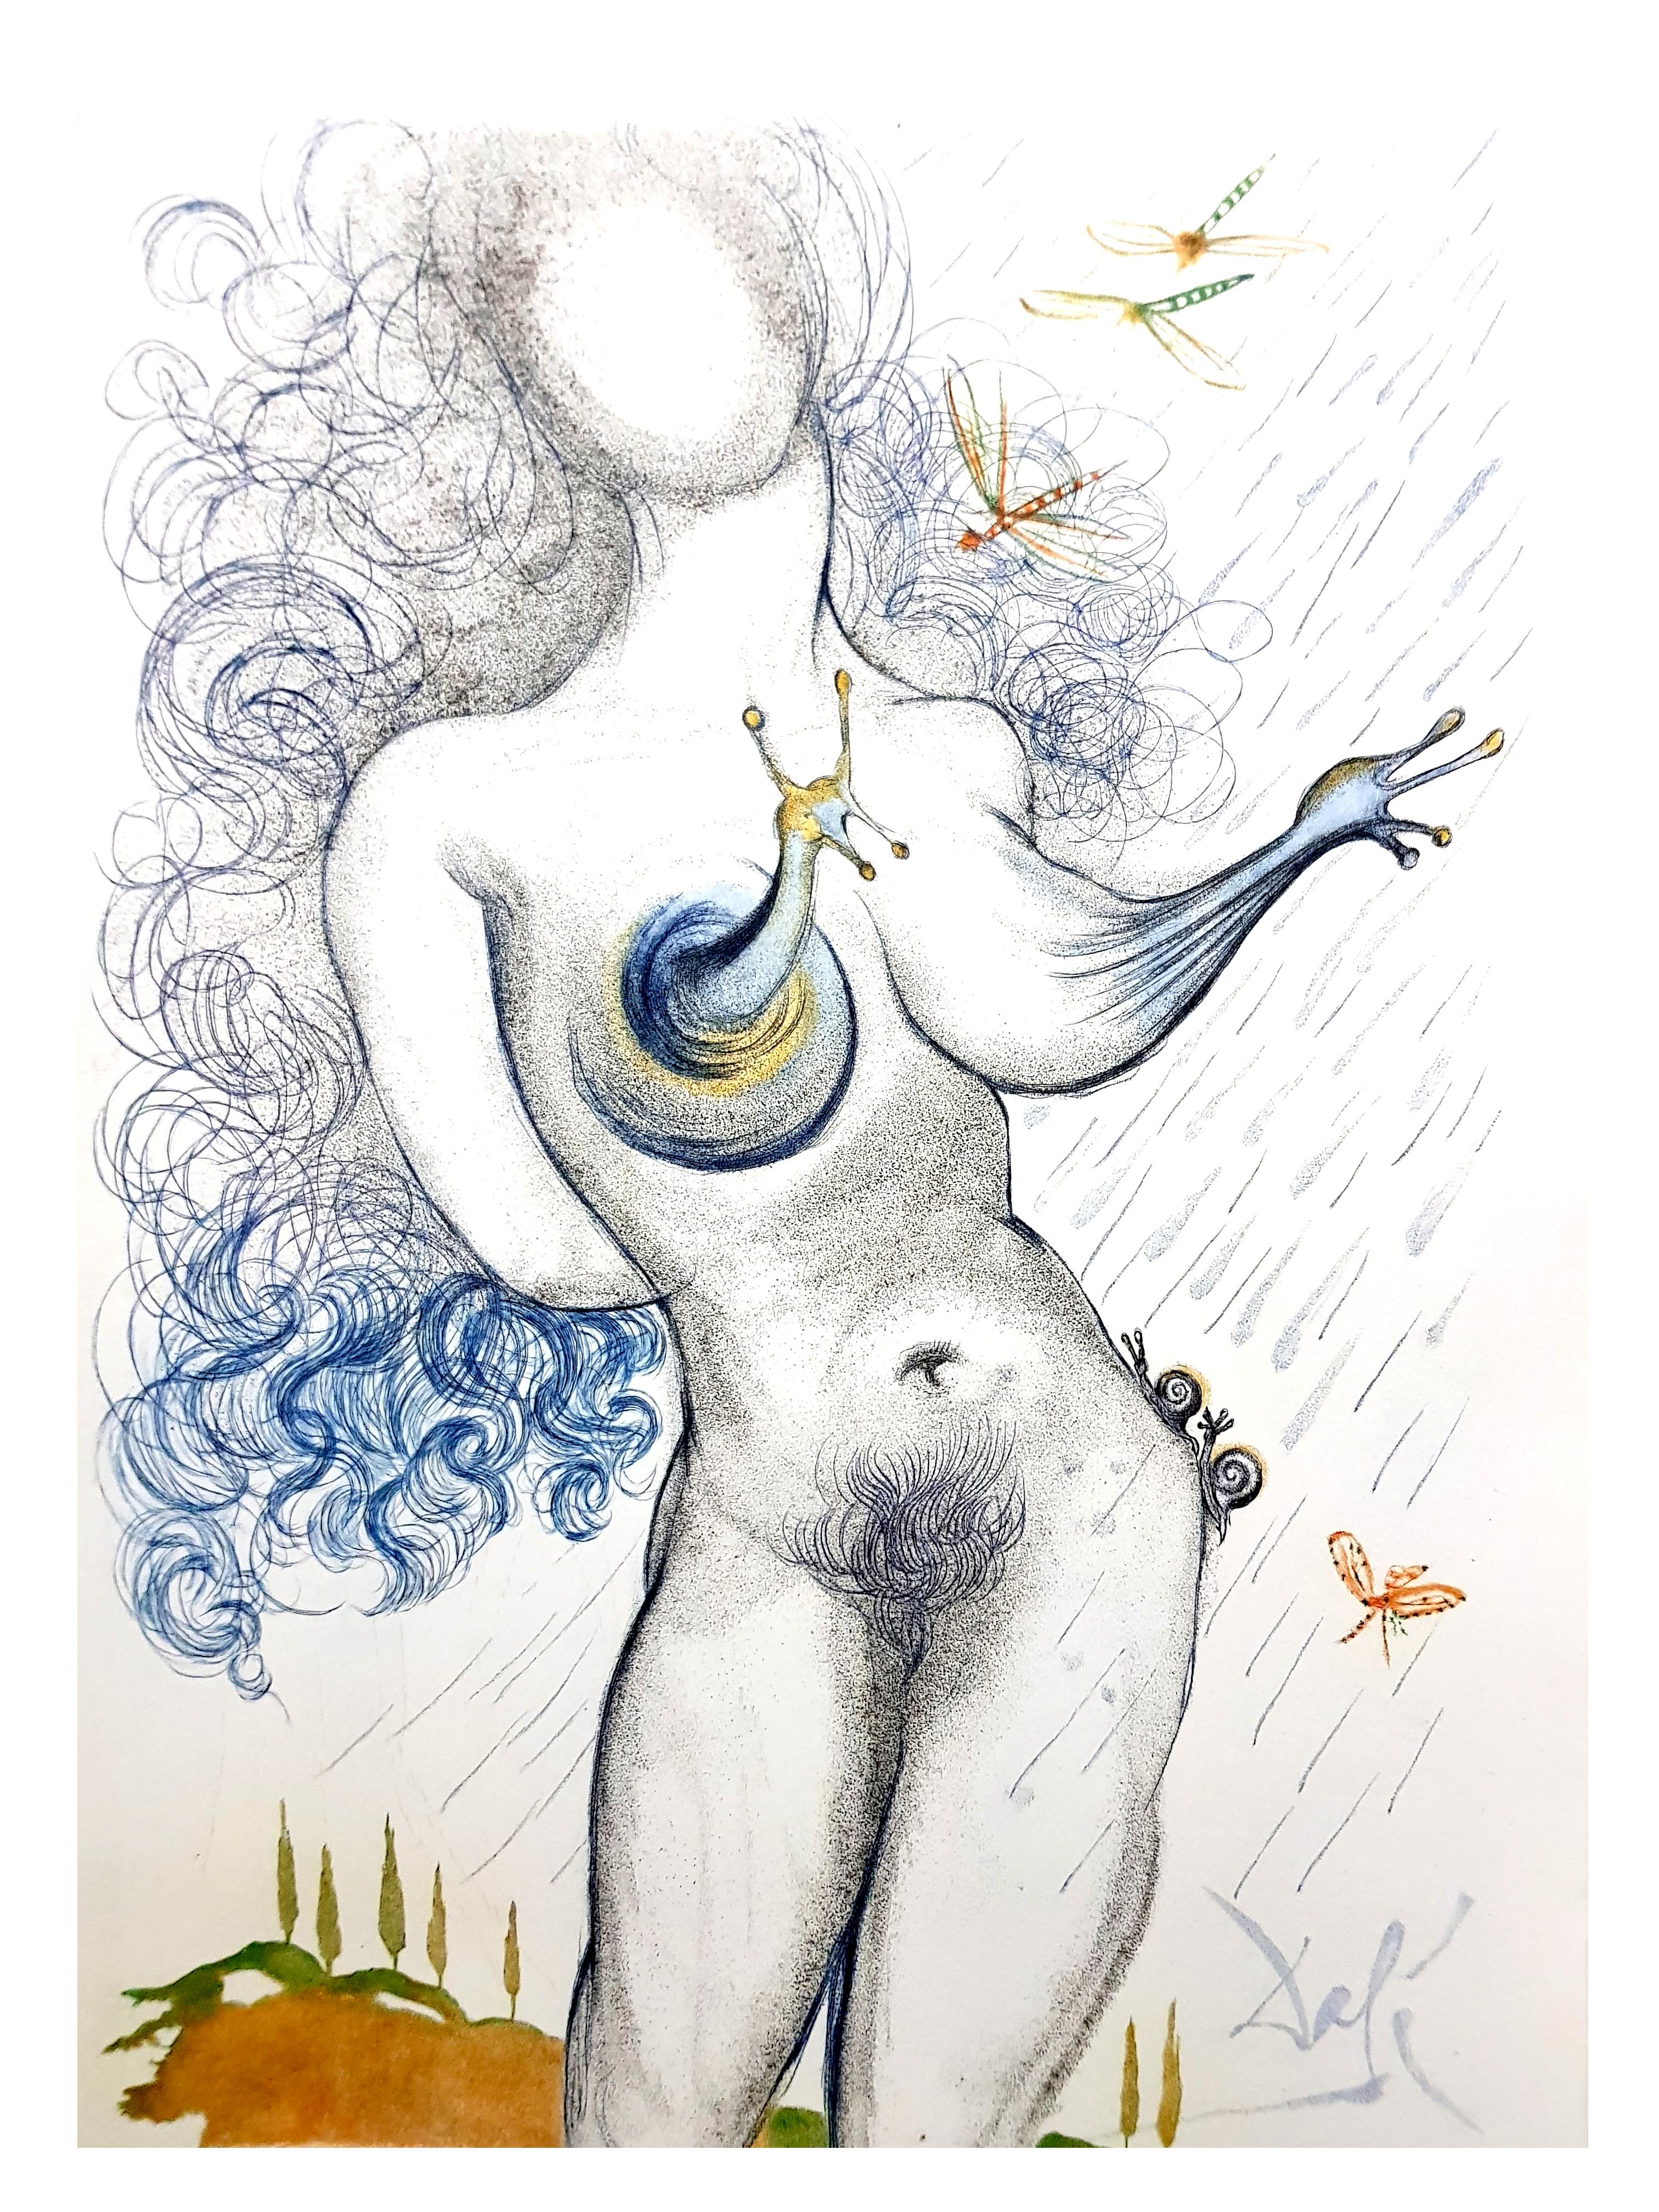 Salvador Dali - Nude with Snails Breats - Original Etching
Dimensions: 38 x 28 cm
Edition: 390
1967
On Rives Vellum
References : Field 67-4 (p. 32-33) / Michler & Lopsinger 174 to 187. 